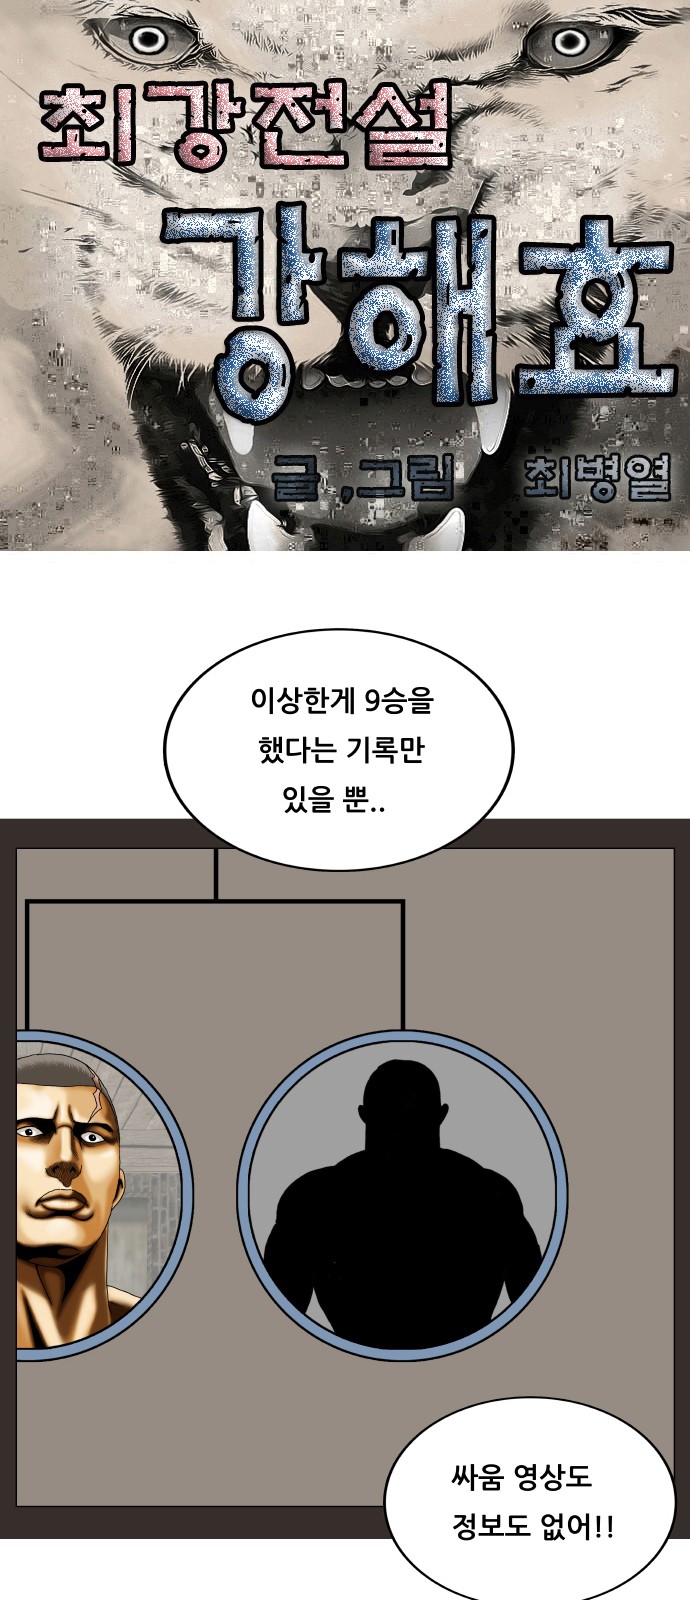 Ultimate Legend - Kang Hae Hyo - Chapter 414 - Page 1